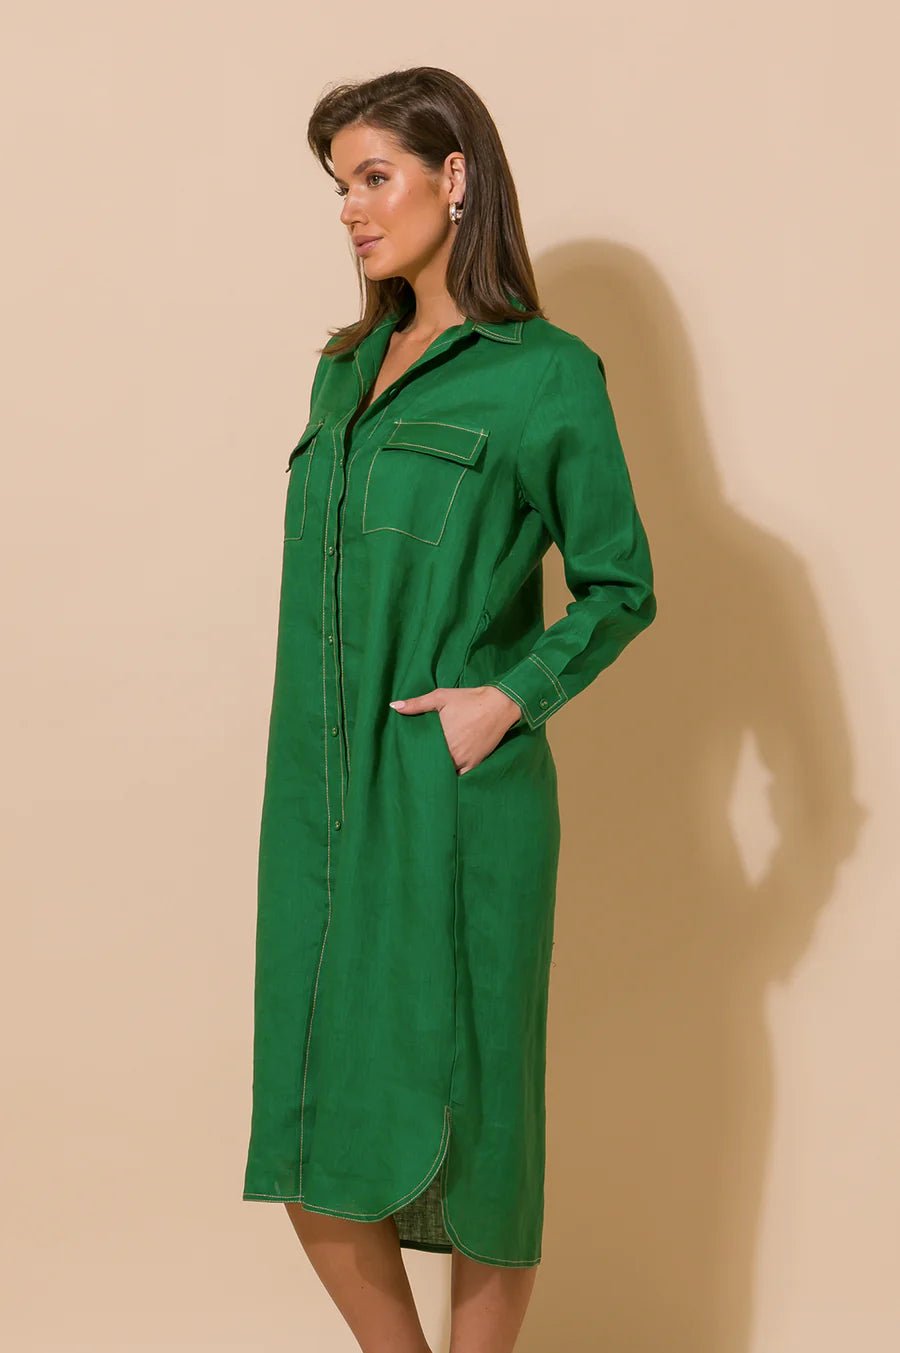 Petrina Contrast Stitch Linen Dress (Green) - Something For Me​​